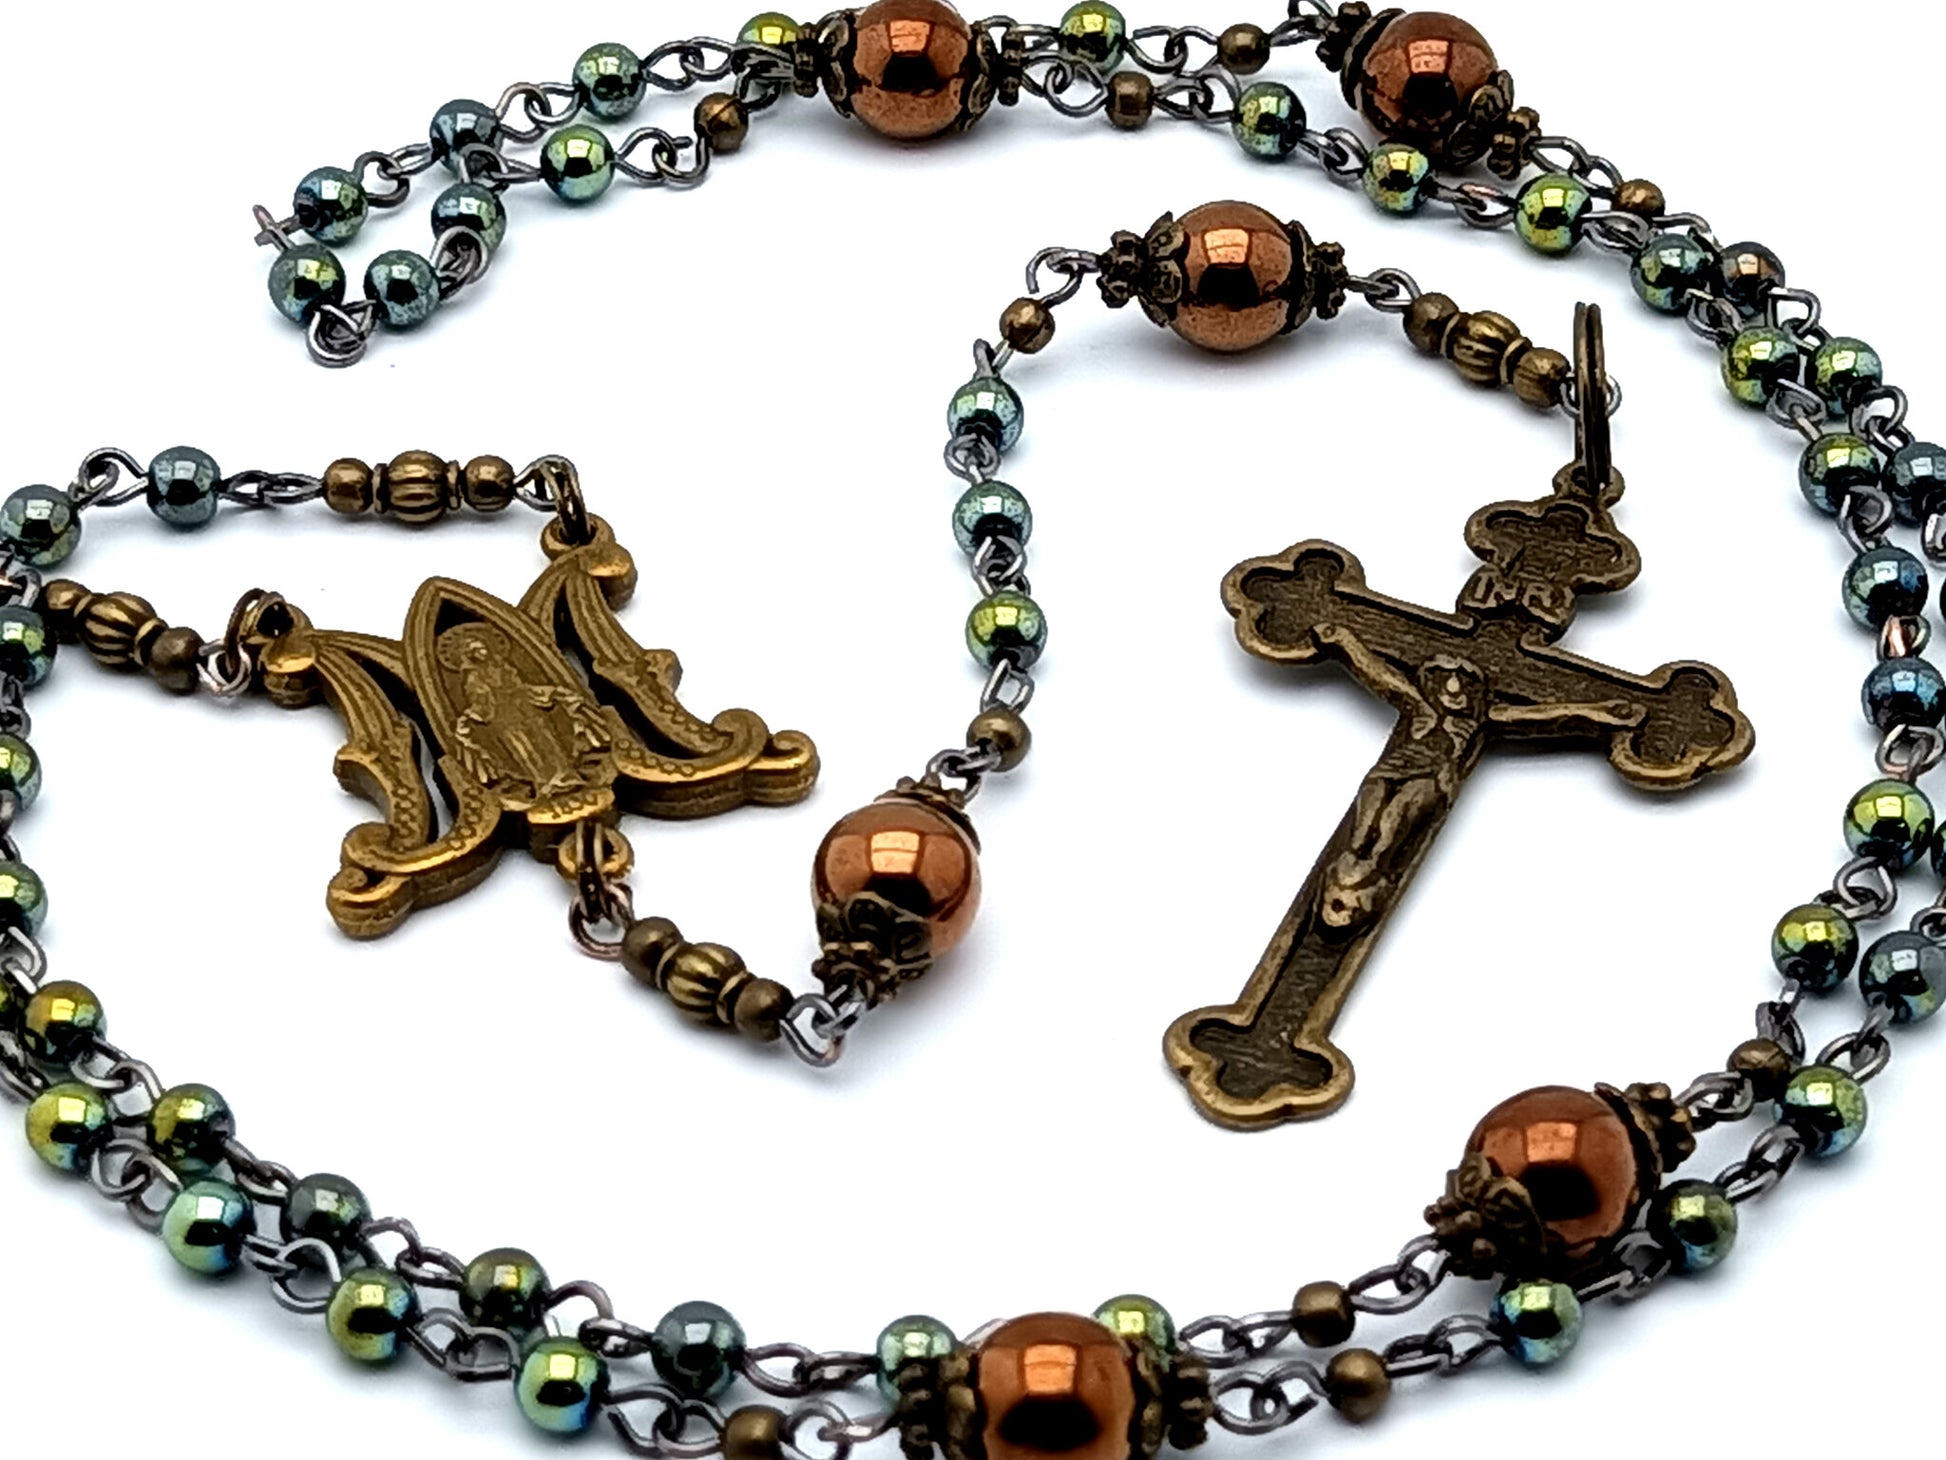 Victorian Style Crucifix Pendant, Rosary Making Supplies